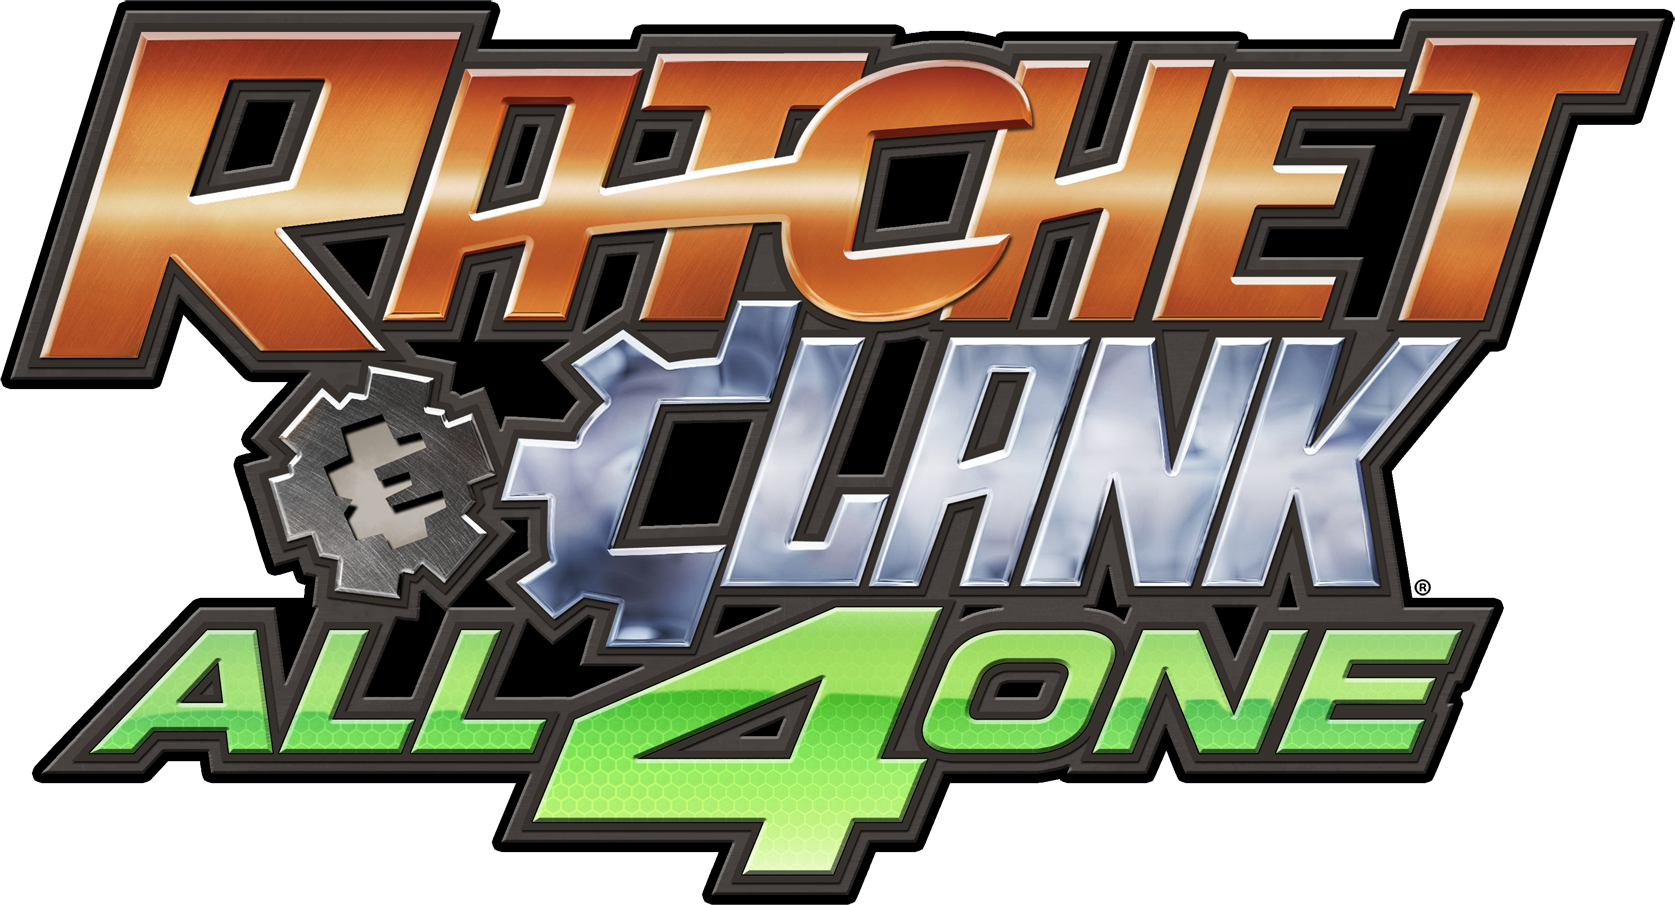 Ratchet & Clank: All 4 One - PS3 - Ratchet Galaxy